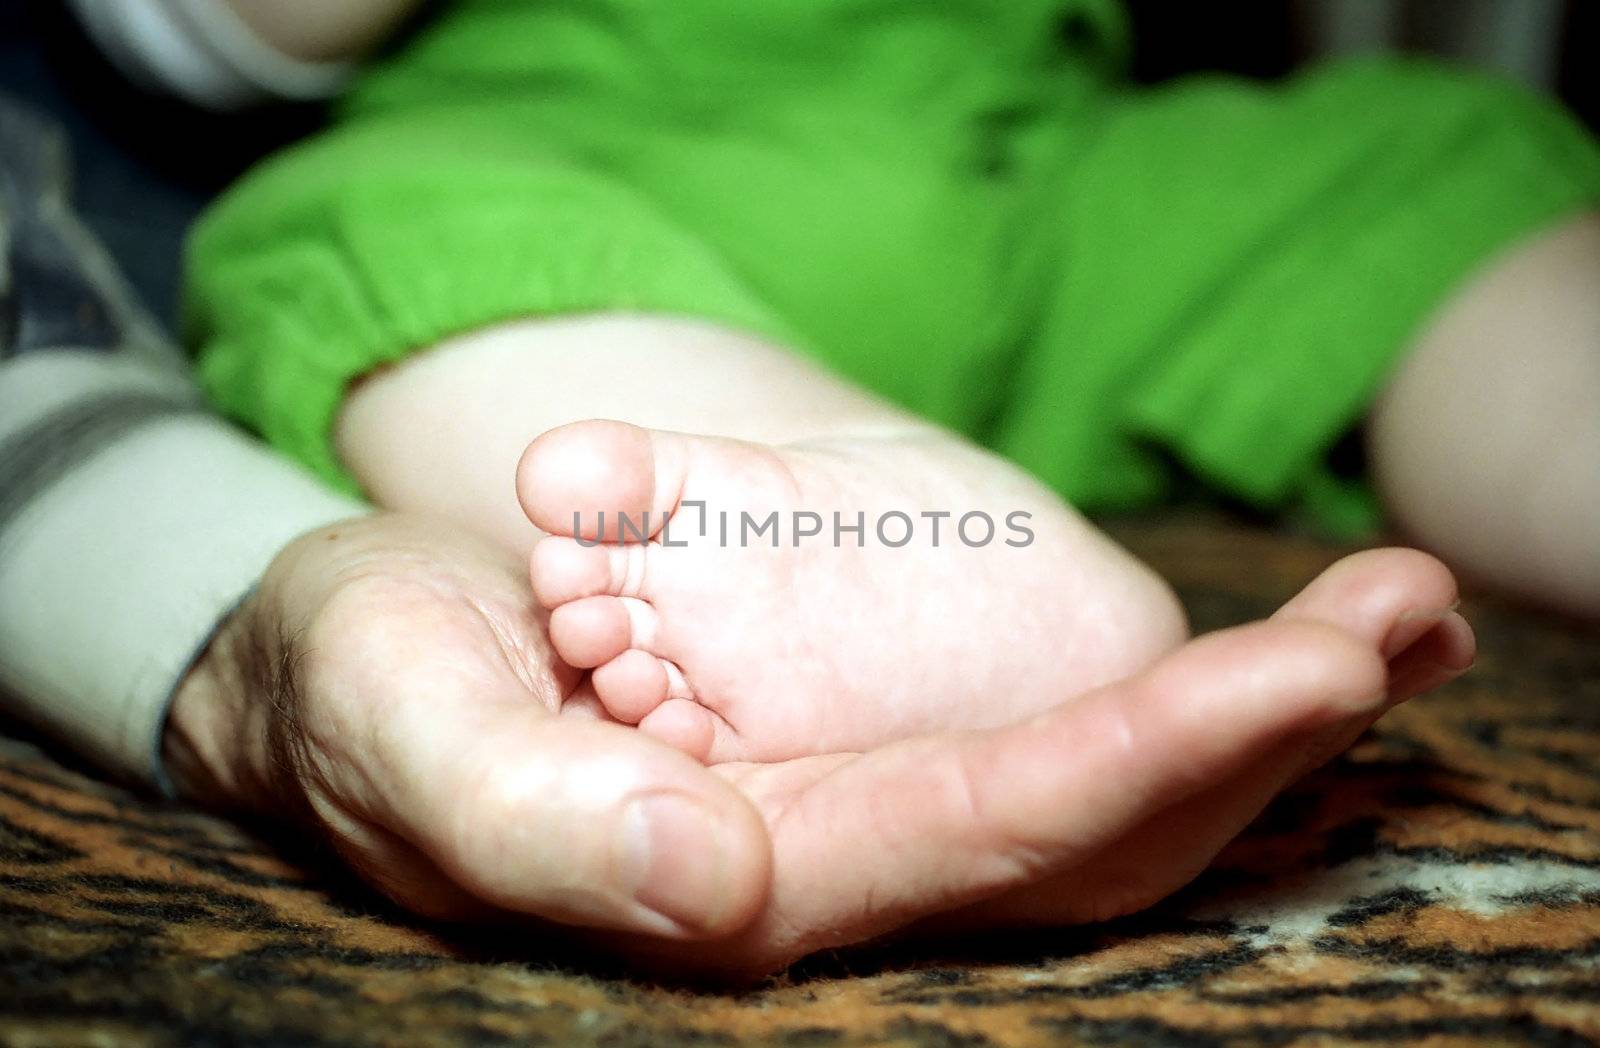 Infant foot on man's palm by mulden